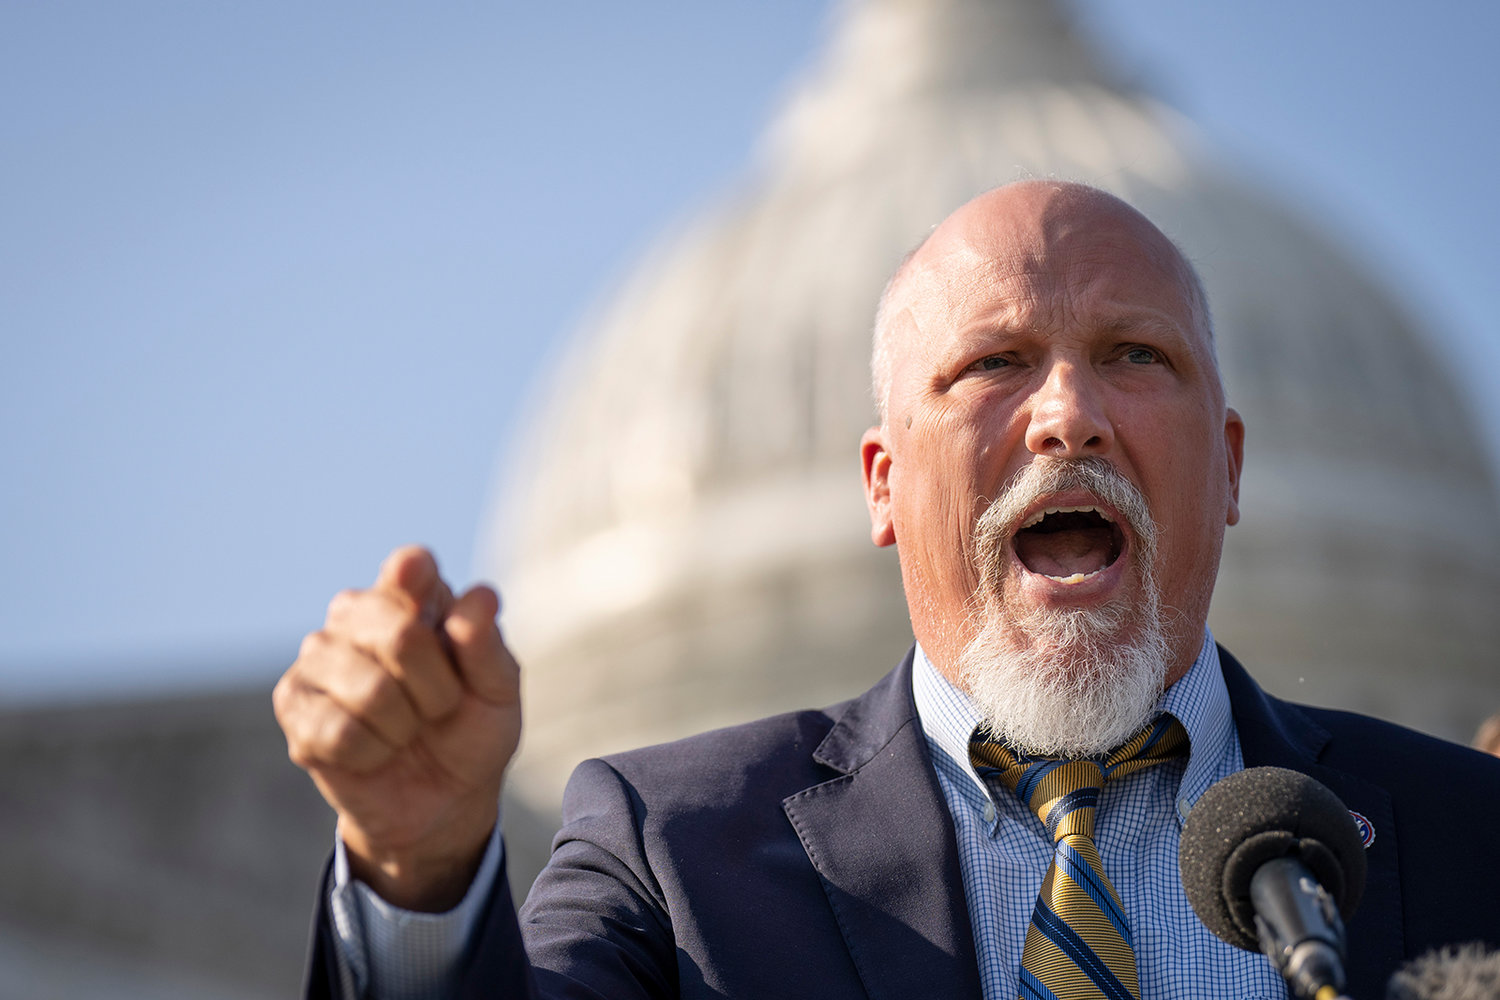 U.S. Rep. Chip Roy, R-Texas, speaks at a news conference with members of the House Freedom Caucus on Capitol Hill Sept. 15, 2022, in Washington, D.C. (Drew Angerer/Getty Images/TNS)